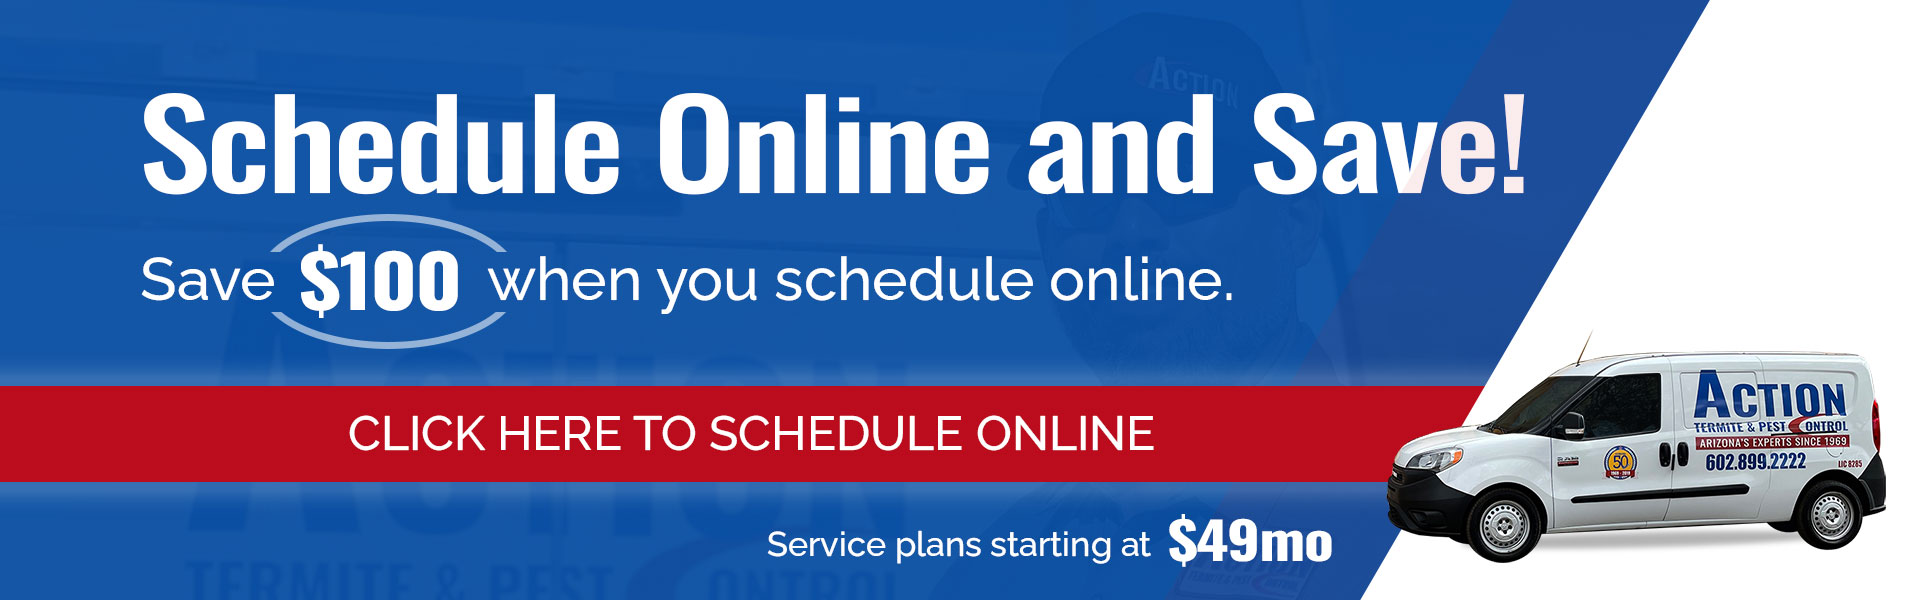 Schedule Online and Save $100! - CLICK HERE